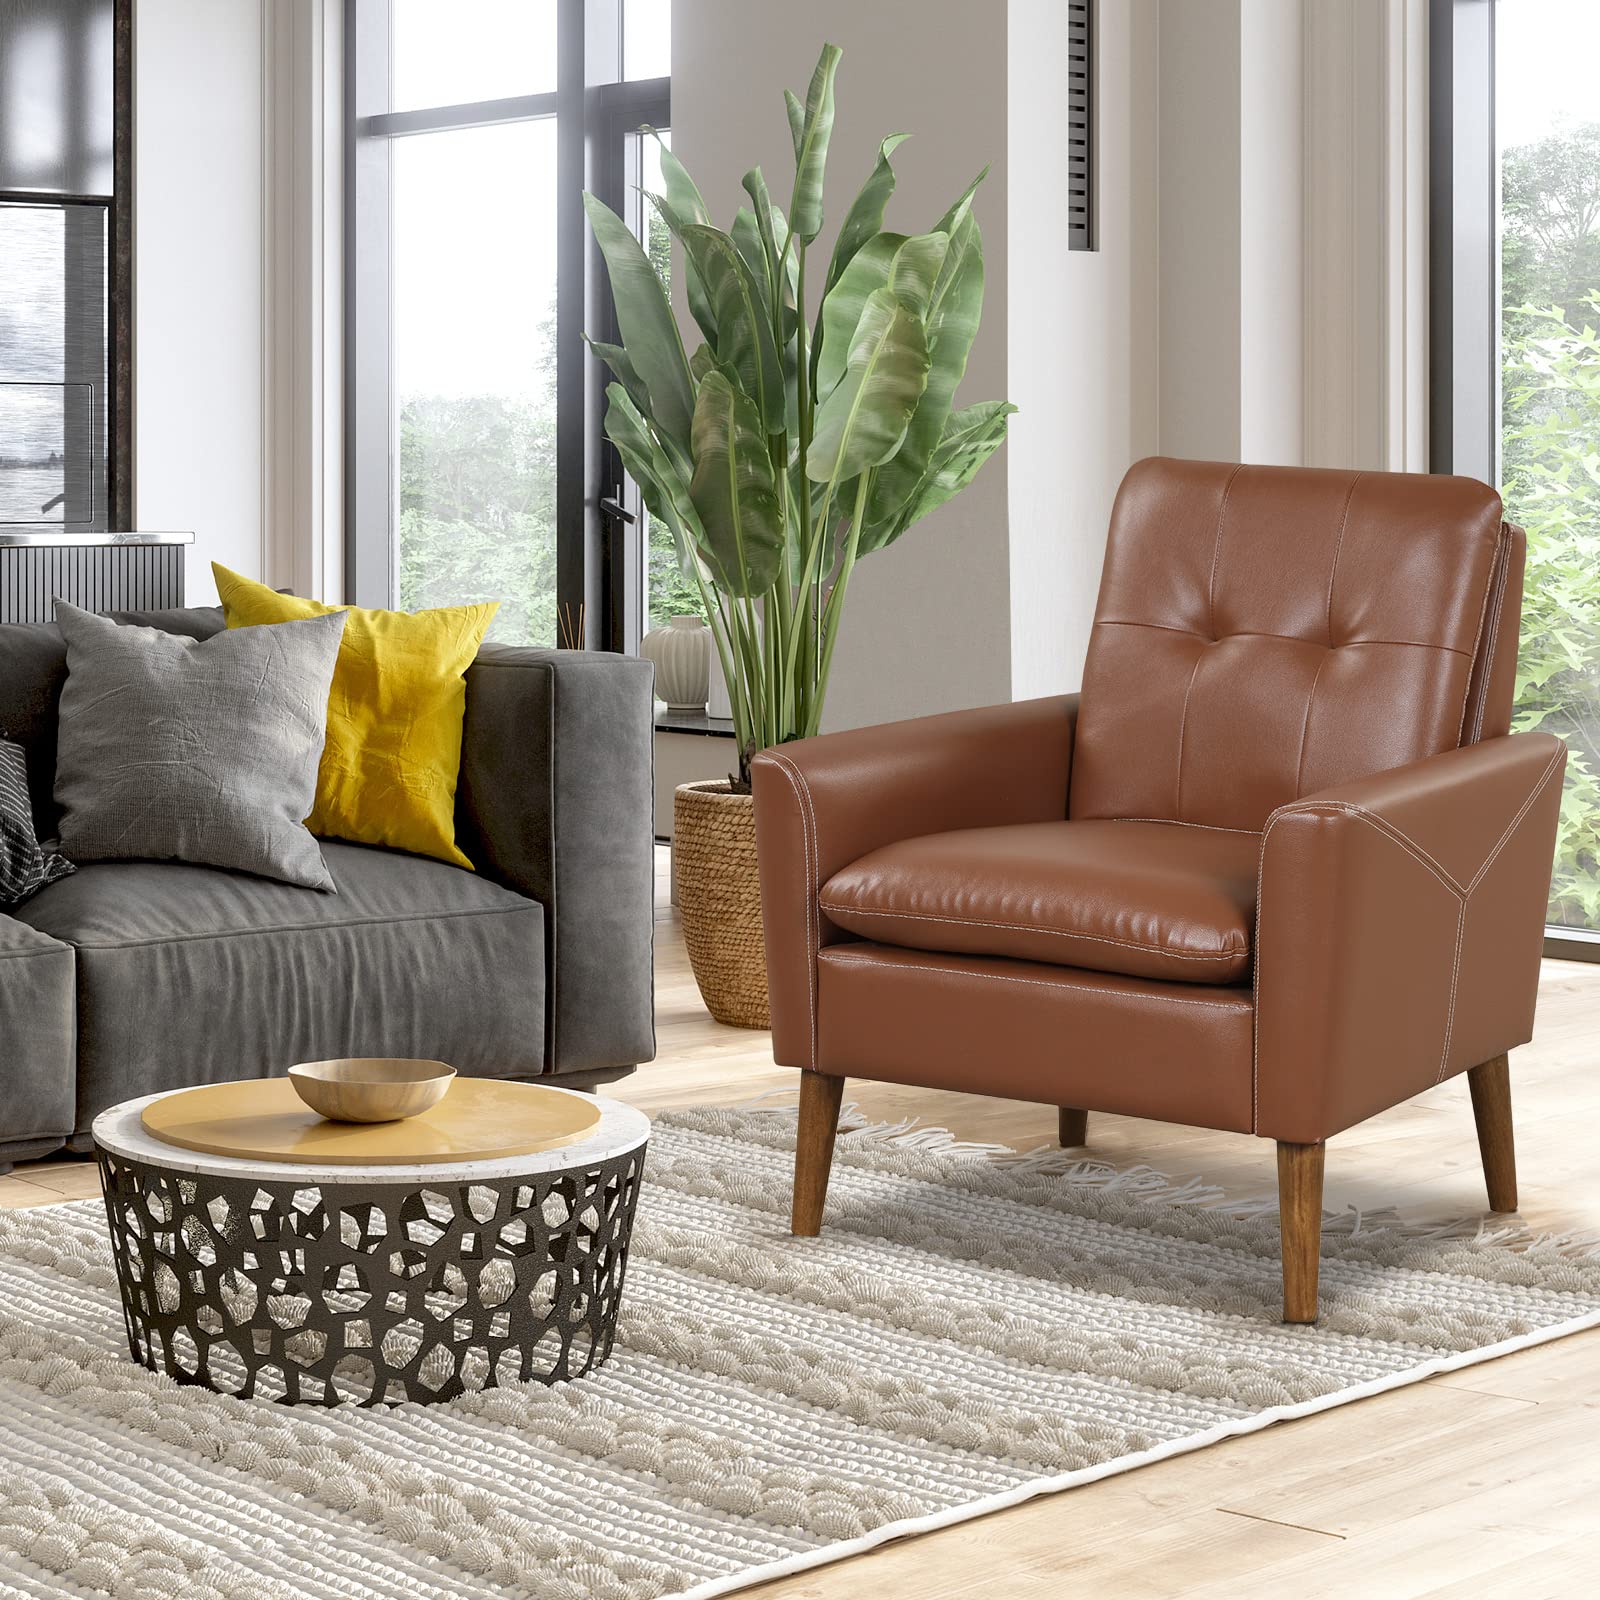 Giantex Modern Leather Accent Chair - Mid-Century Arm Chairs for Living Room, Max Load 400lbs, Brown